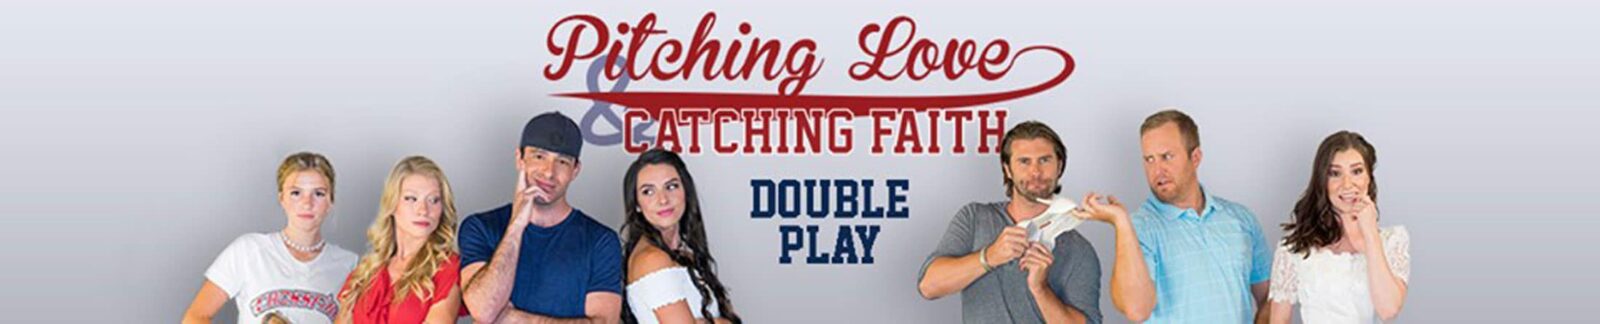 Pitching Love and Catching Faith: Double Play header